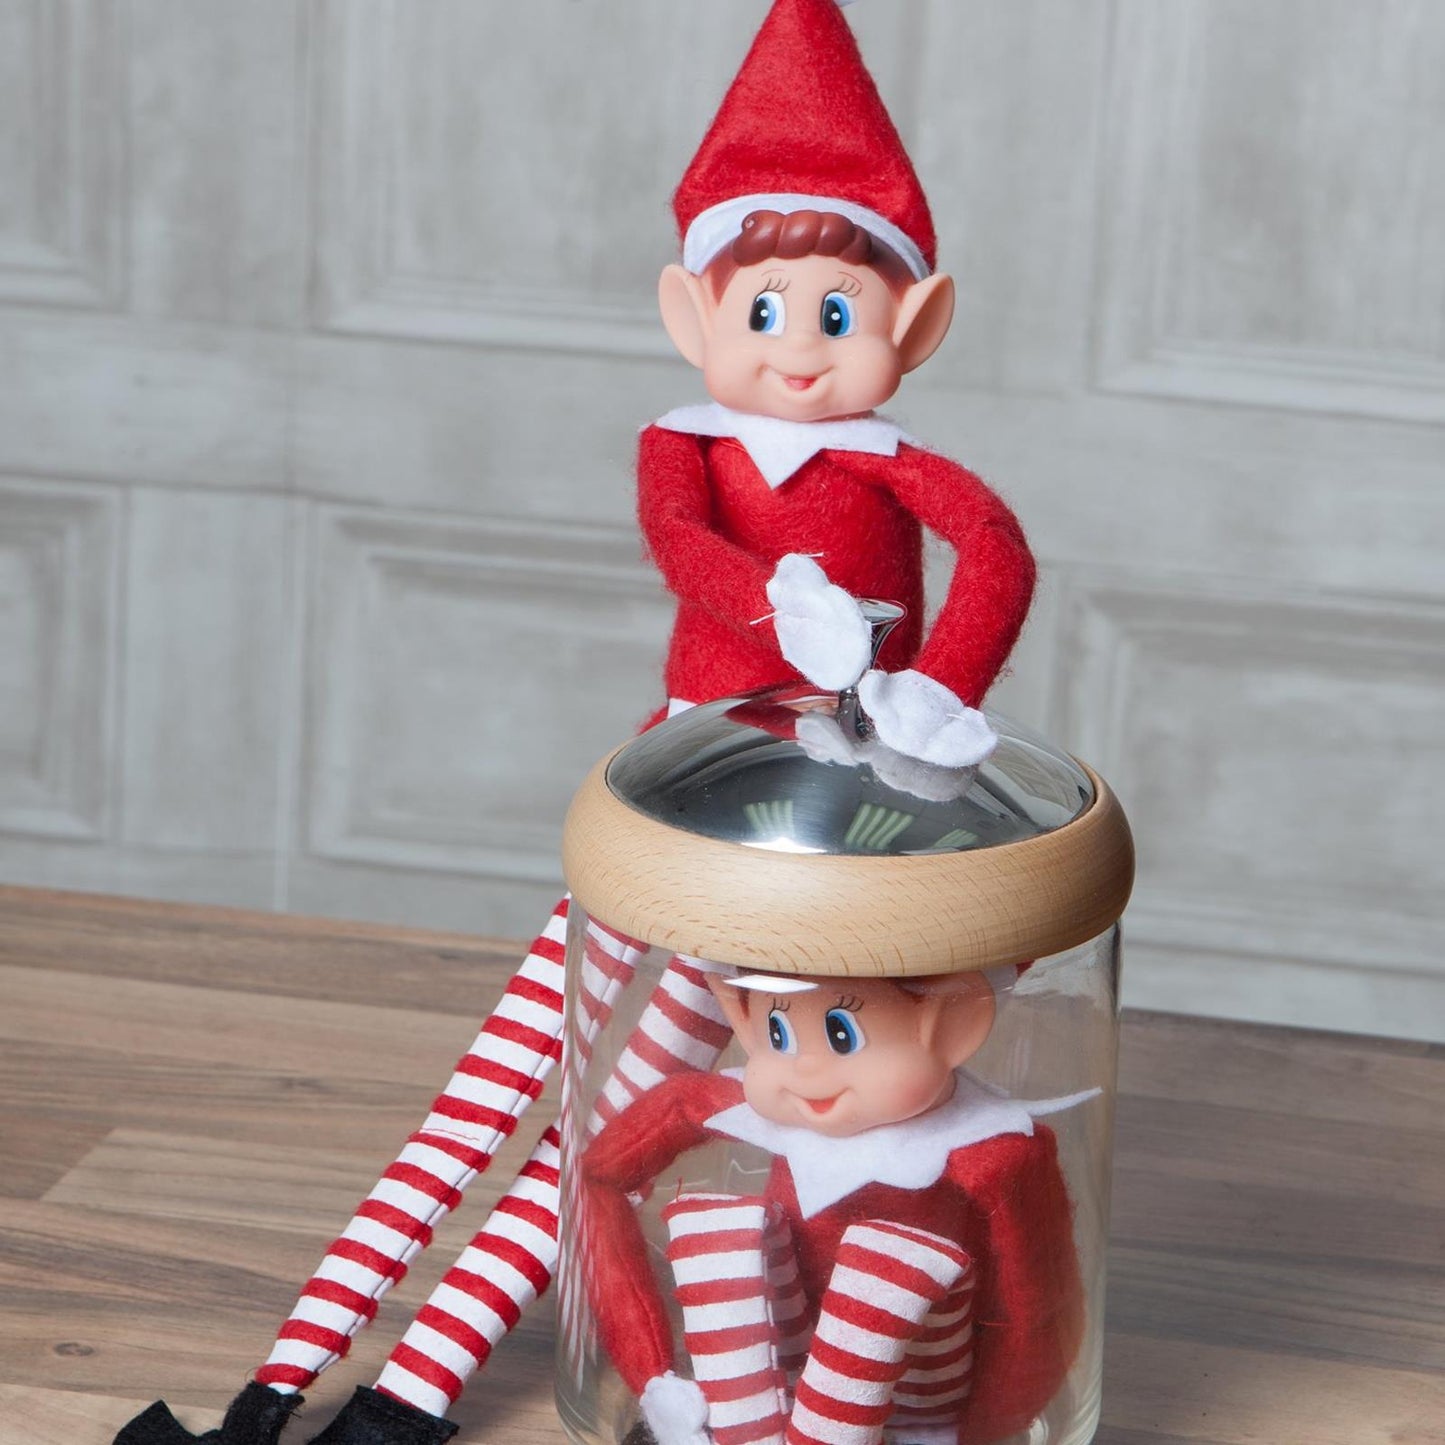 Novelty Plush Dolls Toy Xmas Elf Two-Pack Of Playful Christmas Elf Figurines